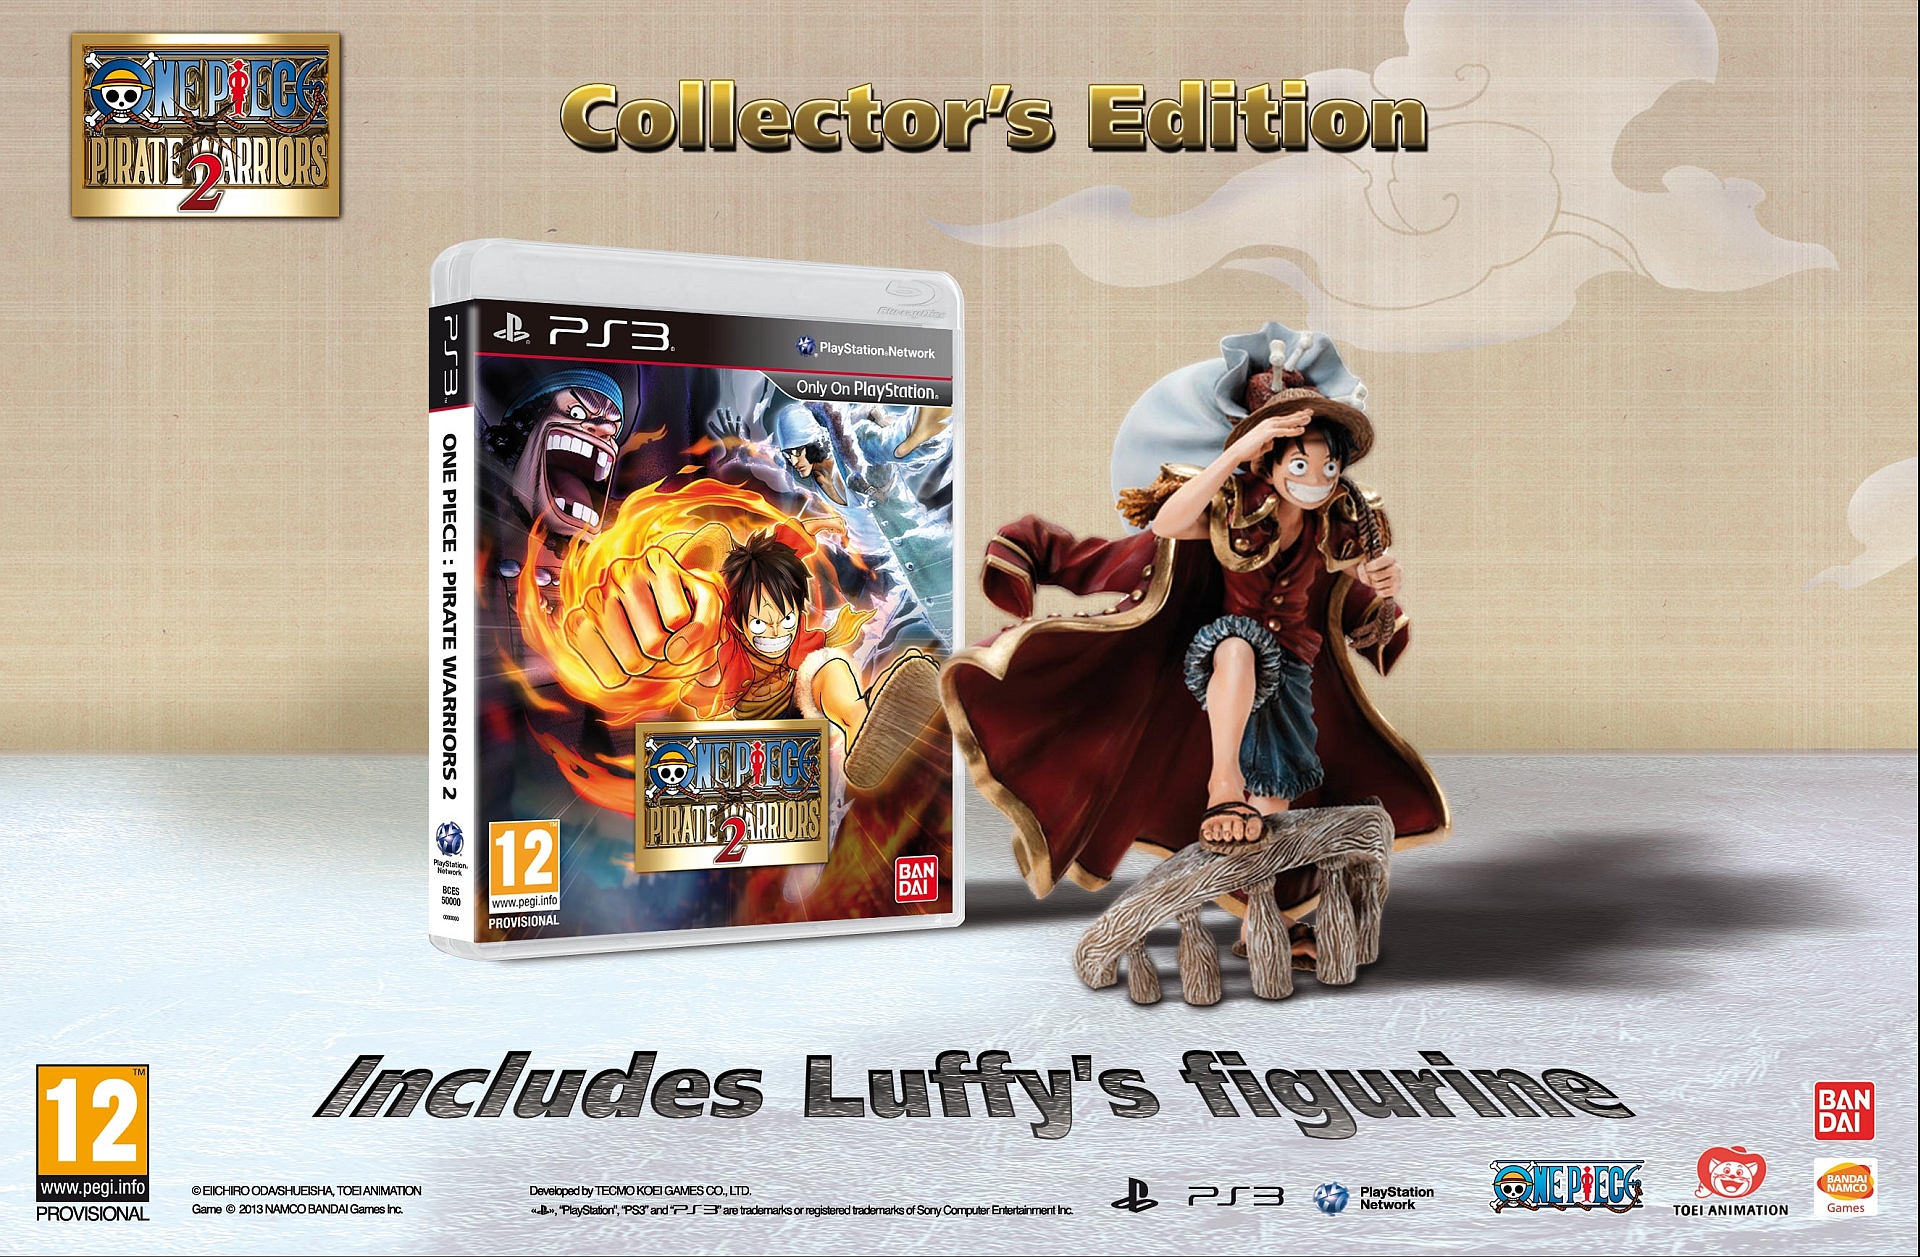 One Piece Pirate Warriors 2 Collectors Edition Europe pic